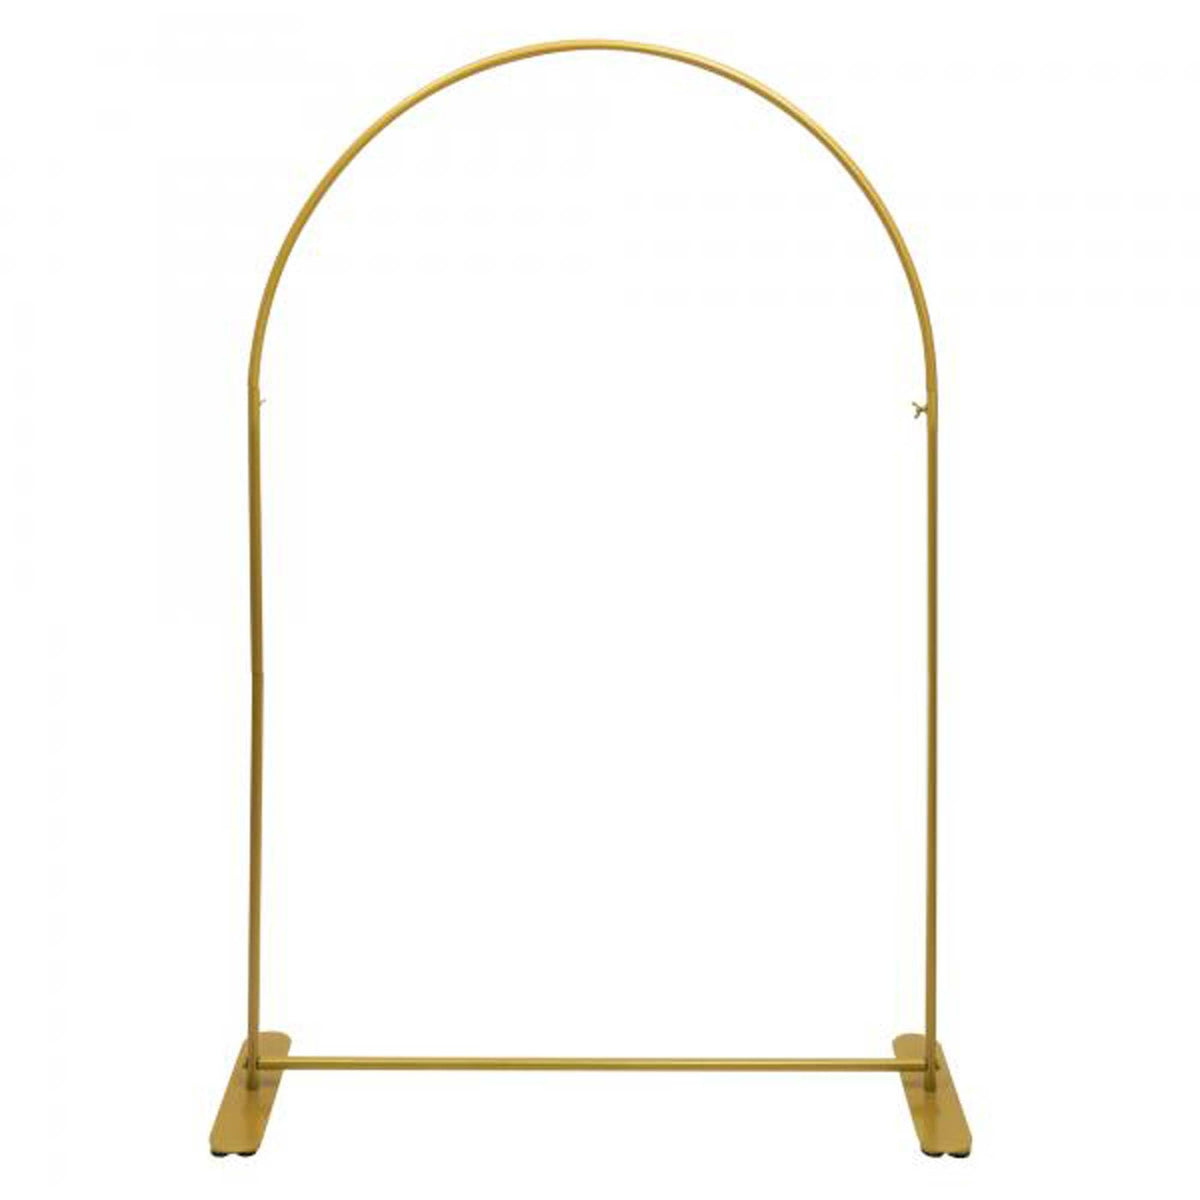 PORTOFINO INTERNATIONAL TRADING USA Balloons Gold Metal Arch Backdrop Stand, 60 x 16 x 90 Inches, 1 Count 745910759951